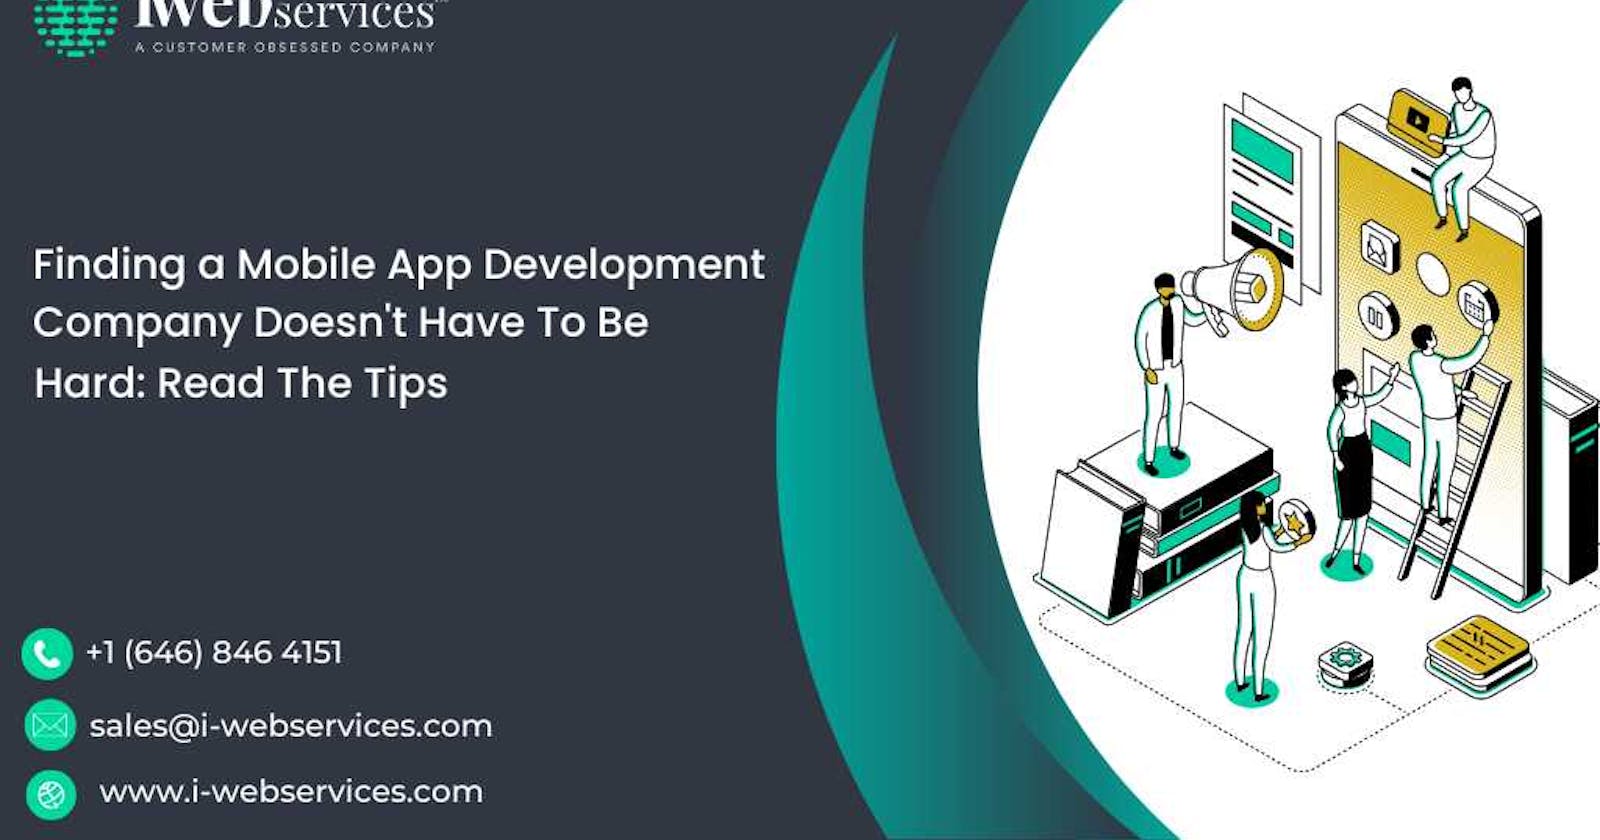 Finding a Mobile App Development Company Doesn't Have To Be Hard: Read The Tips